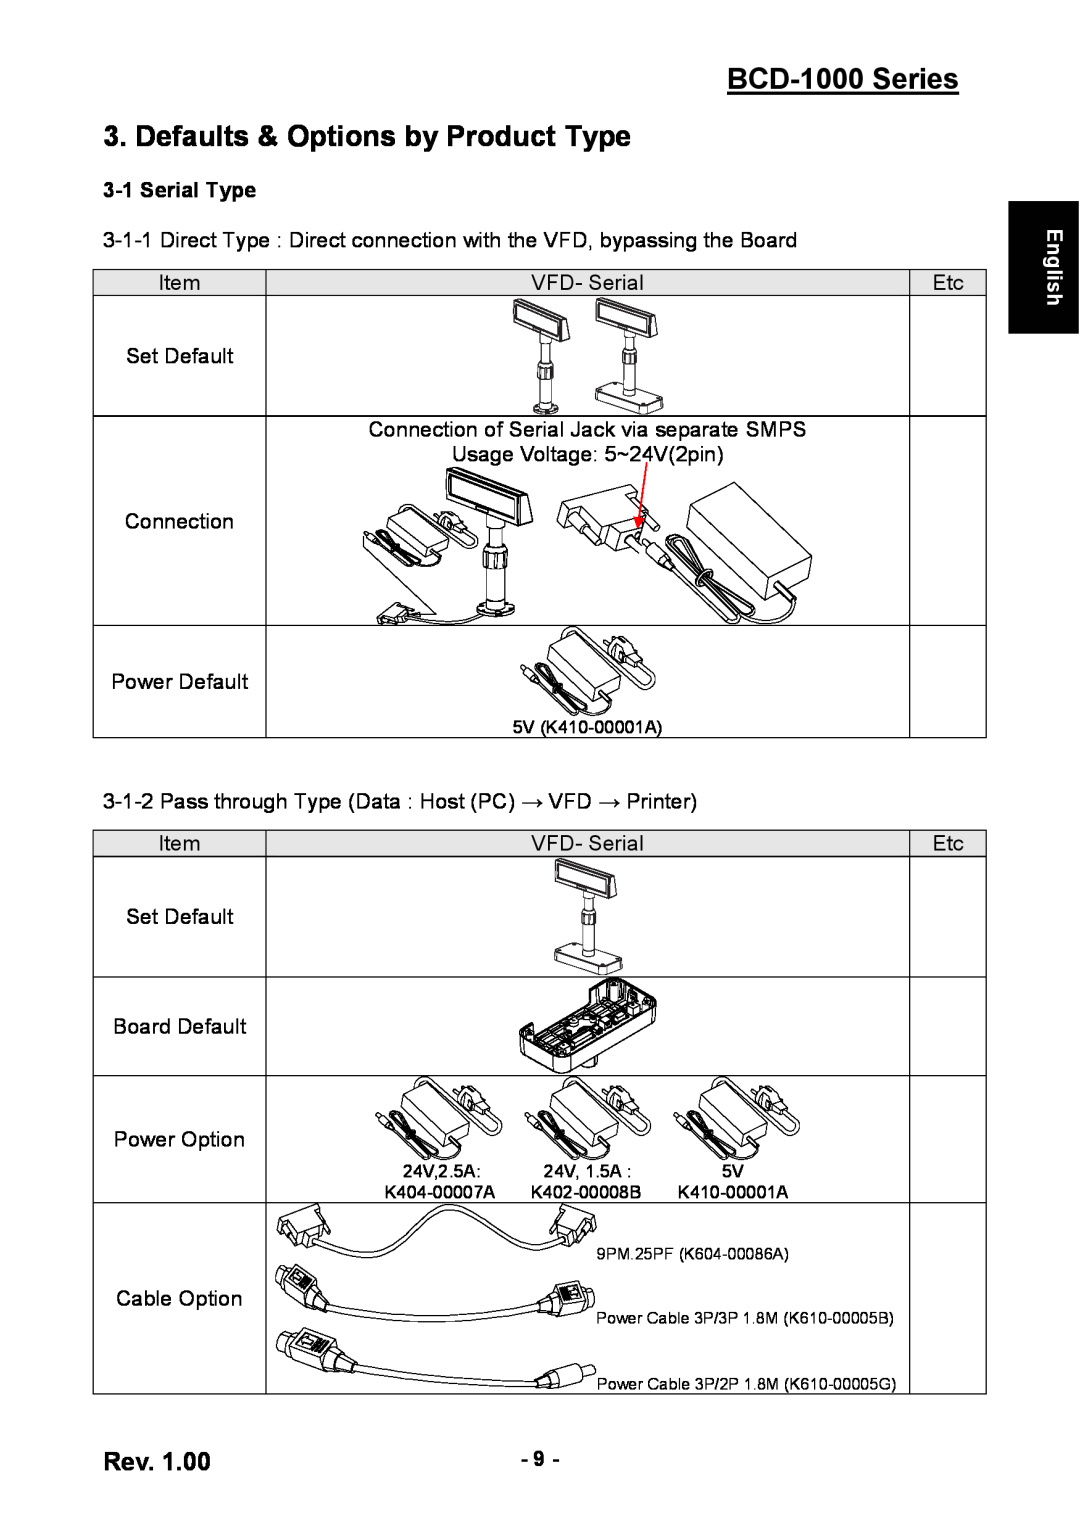 Samsung user manual BCD-1000 Series 3. Defaults & Options by Product Type, Serial Type, English 